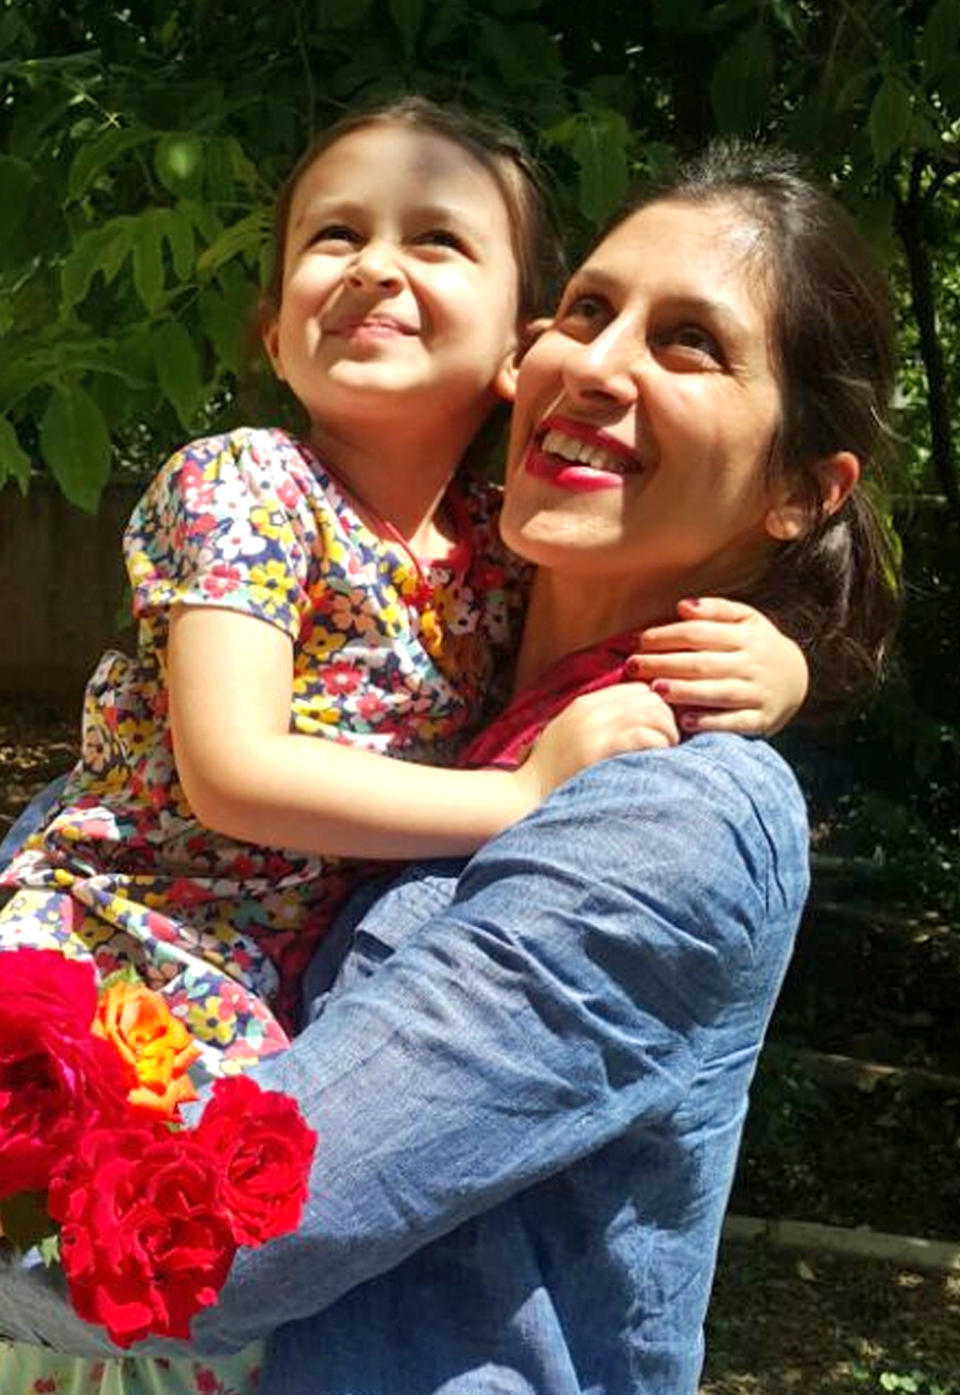 Nazanin Zaghari-Ratcliffe stopped taking food in protest at her 'unfair imprisonment', with her husband also on hunger strike in the UK.